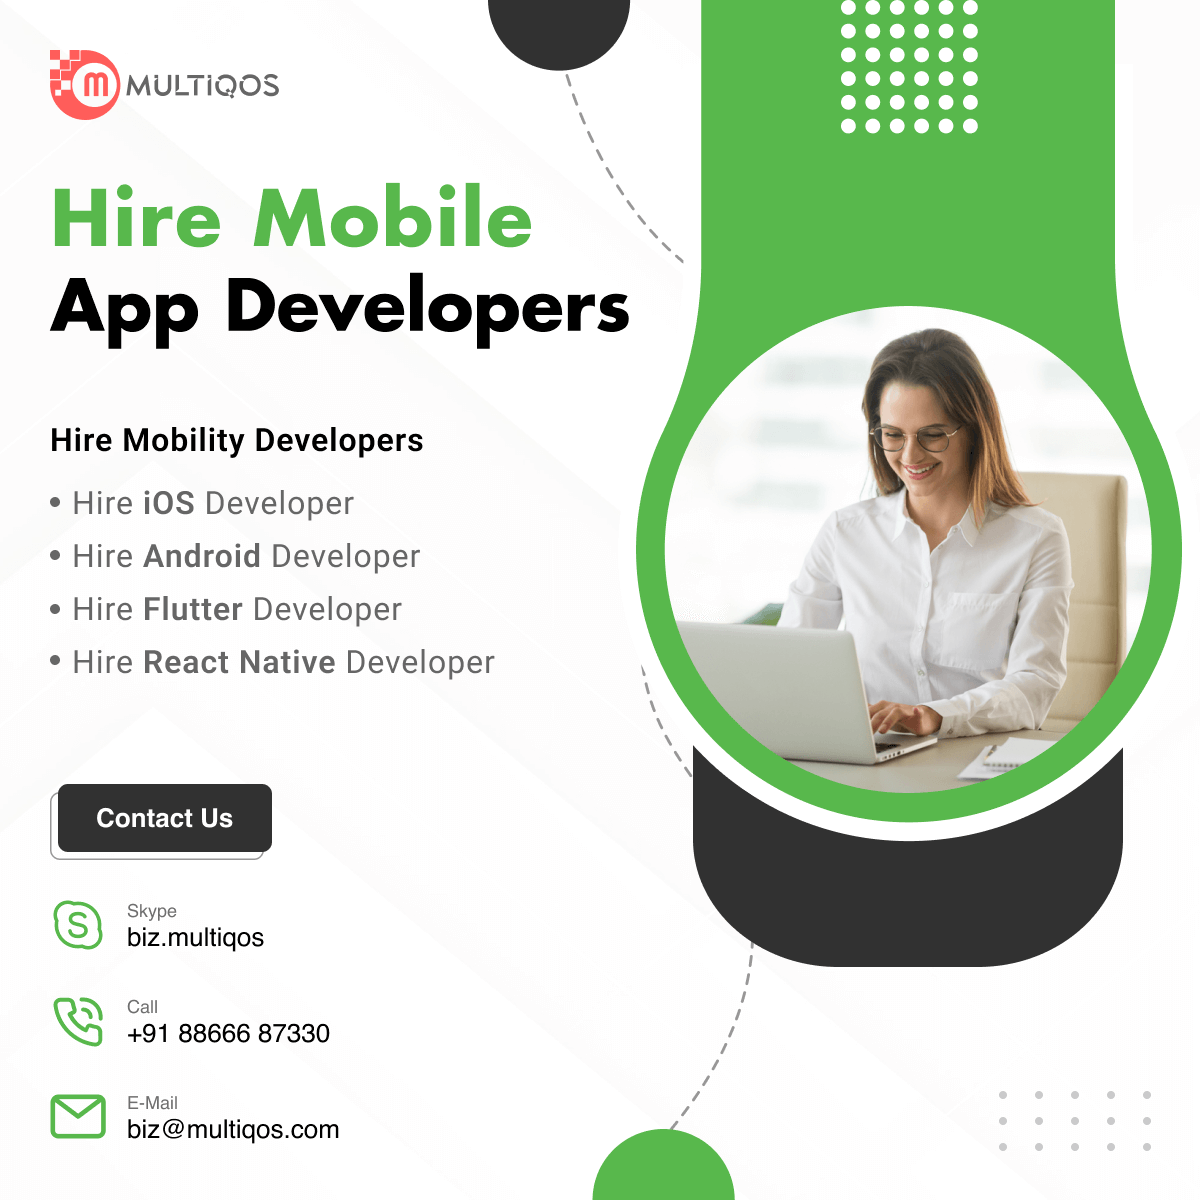 Get the Perfect App for Your Business | Hire Mobile App Developers - New York Computer